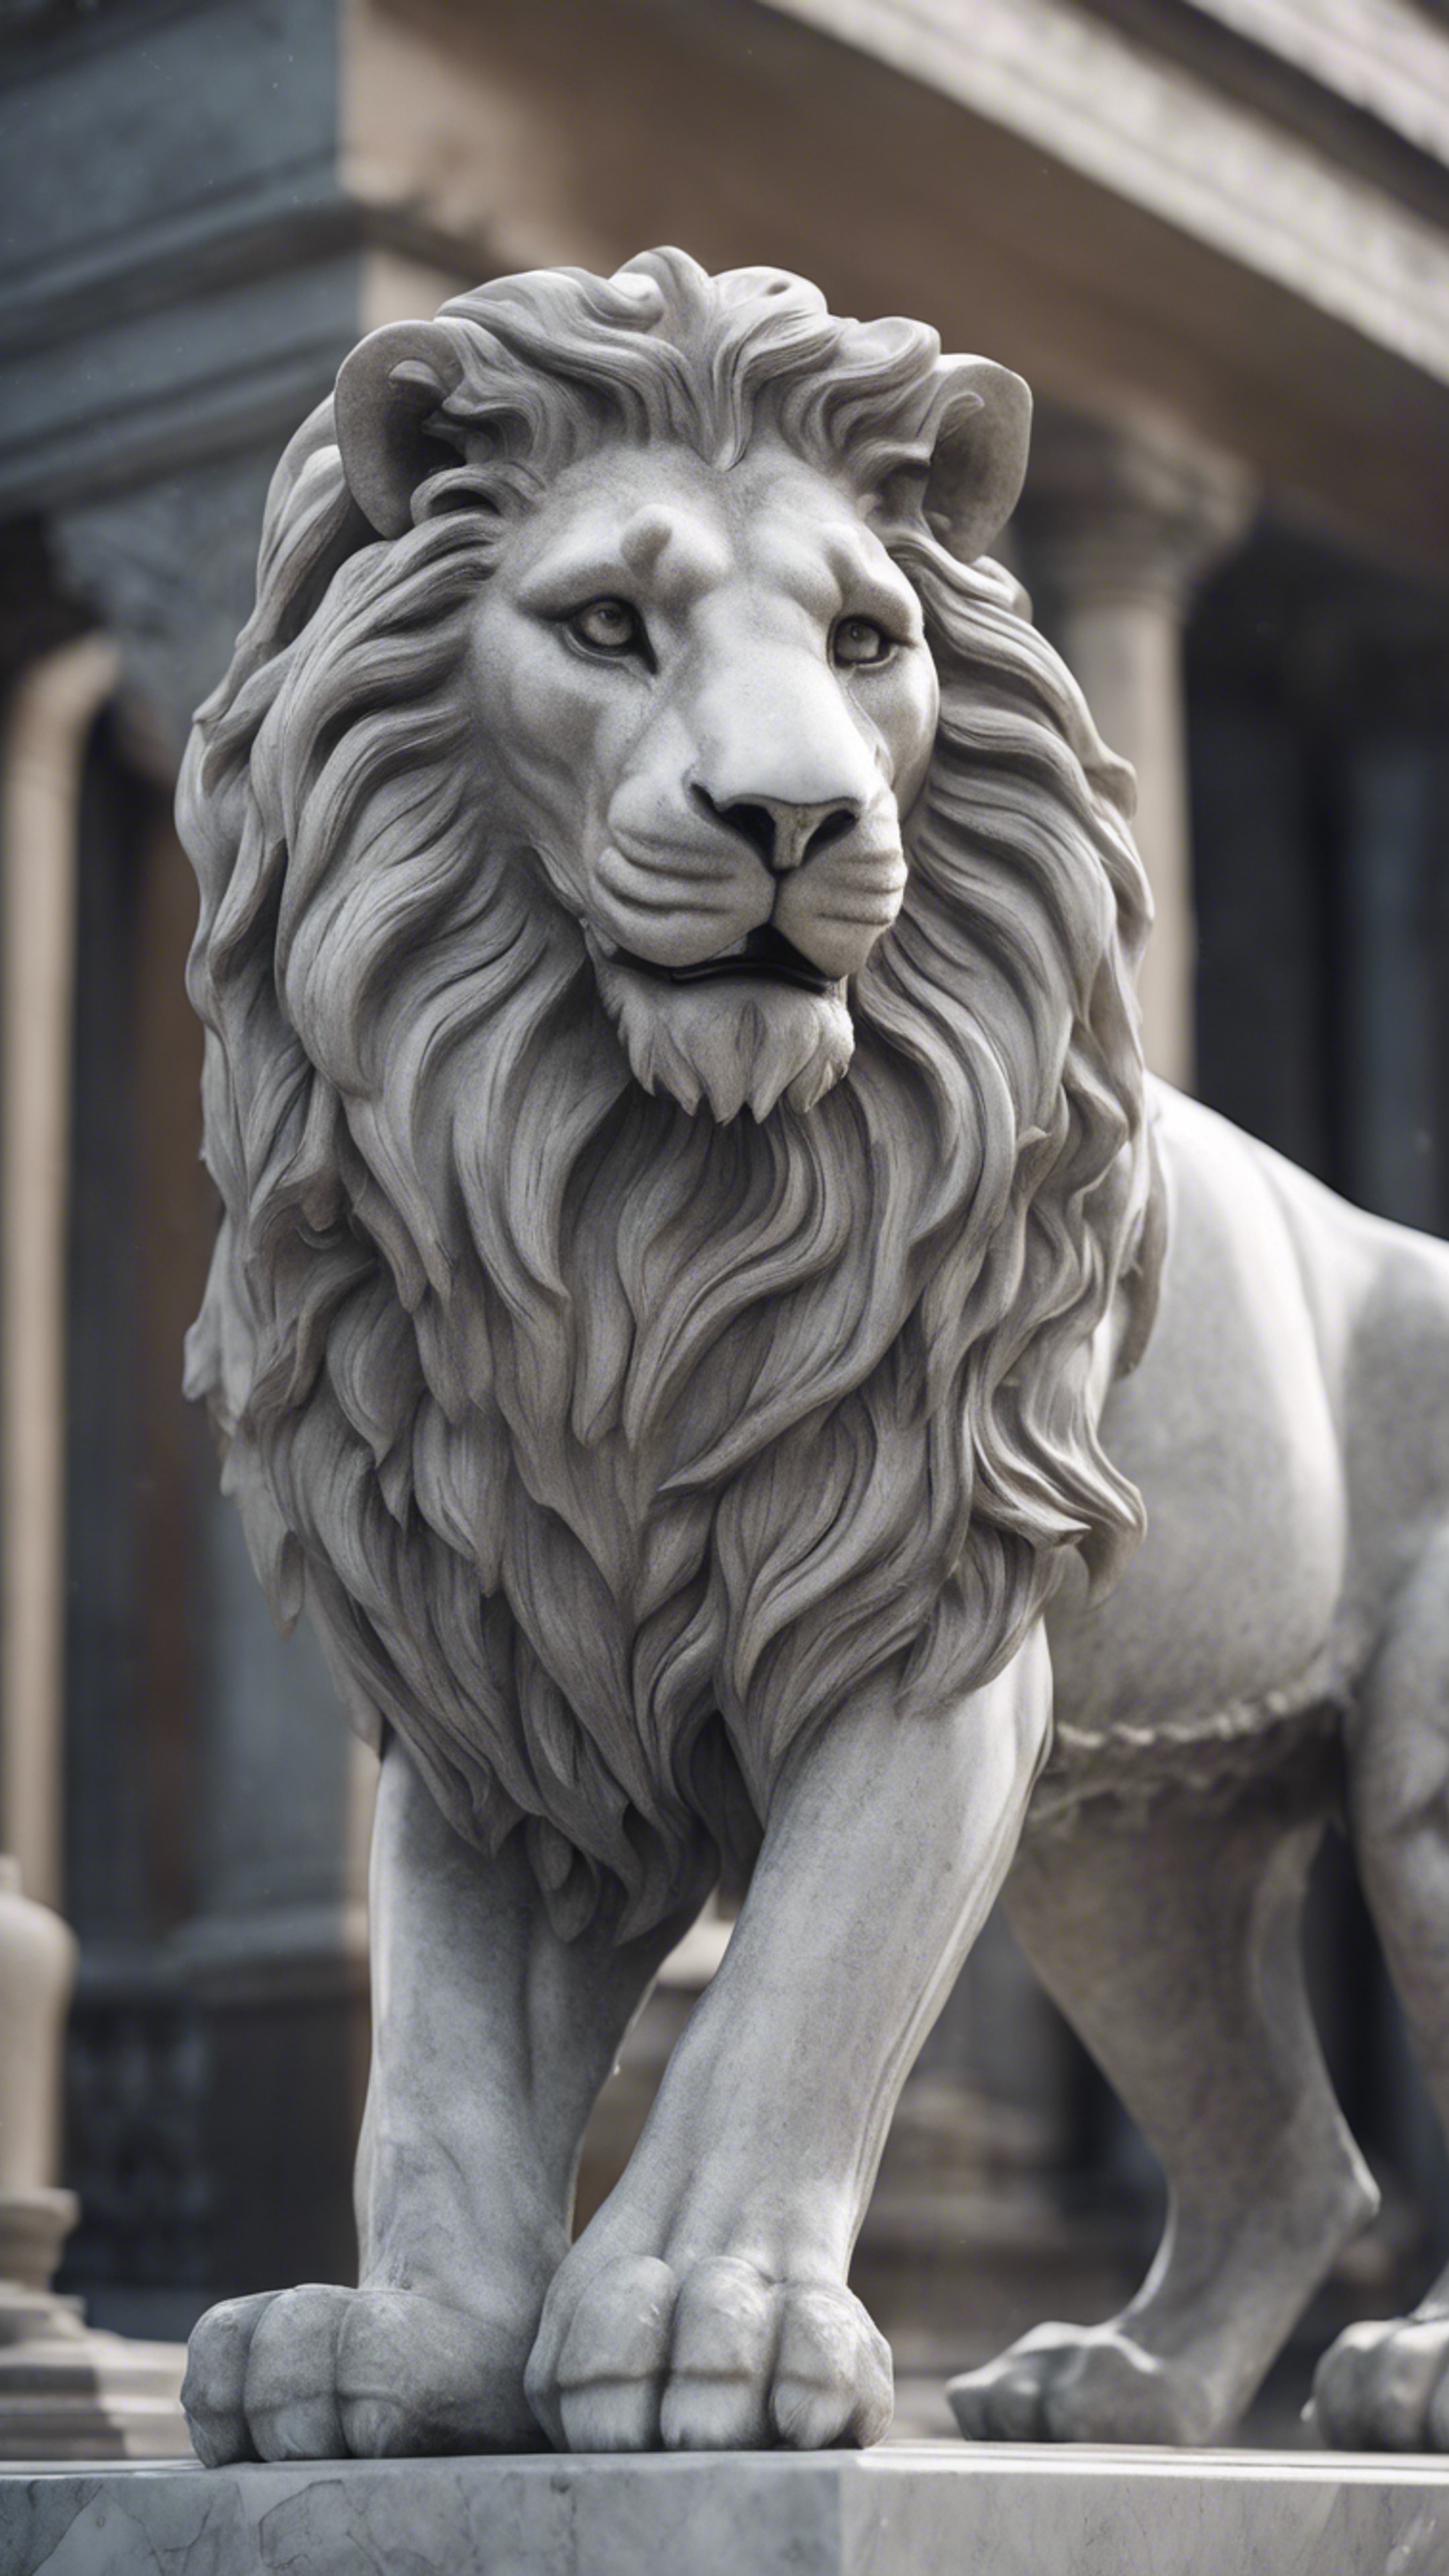 An intricately carved statue of a lion done in a smooth gray marble.壁紙[ef1a2808b47548899cd3]